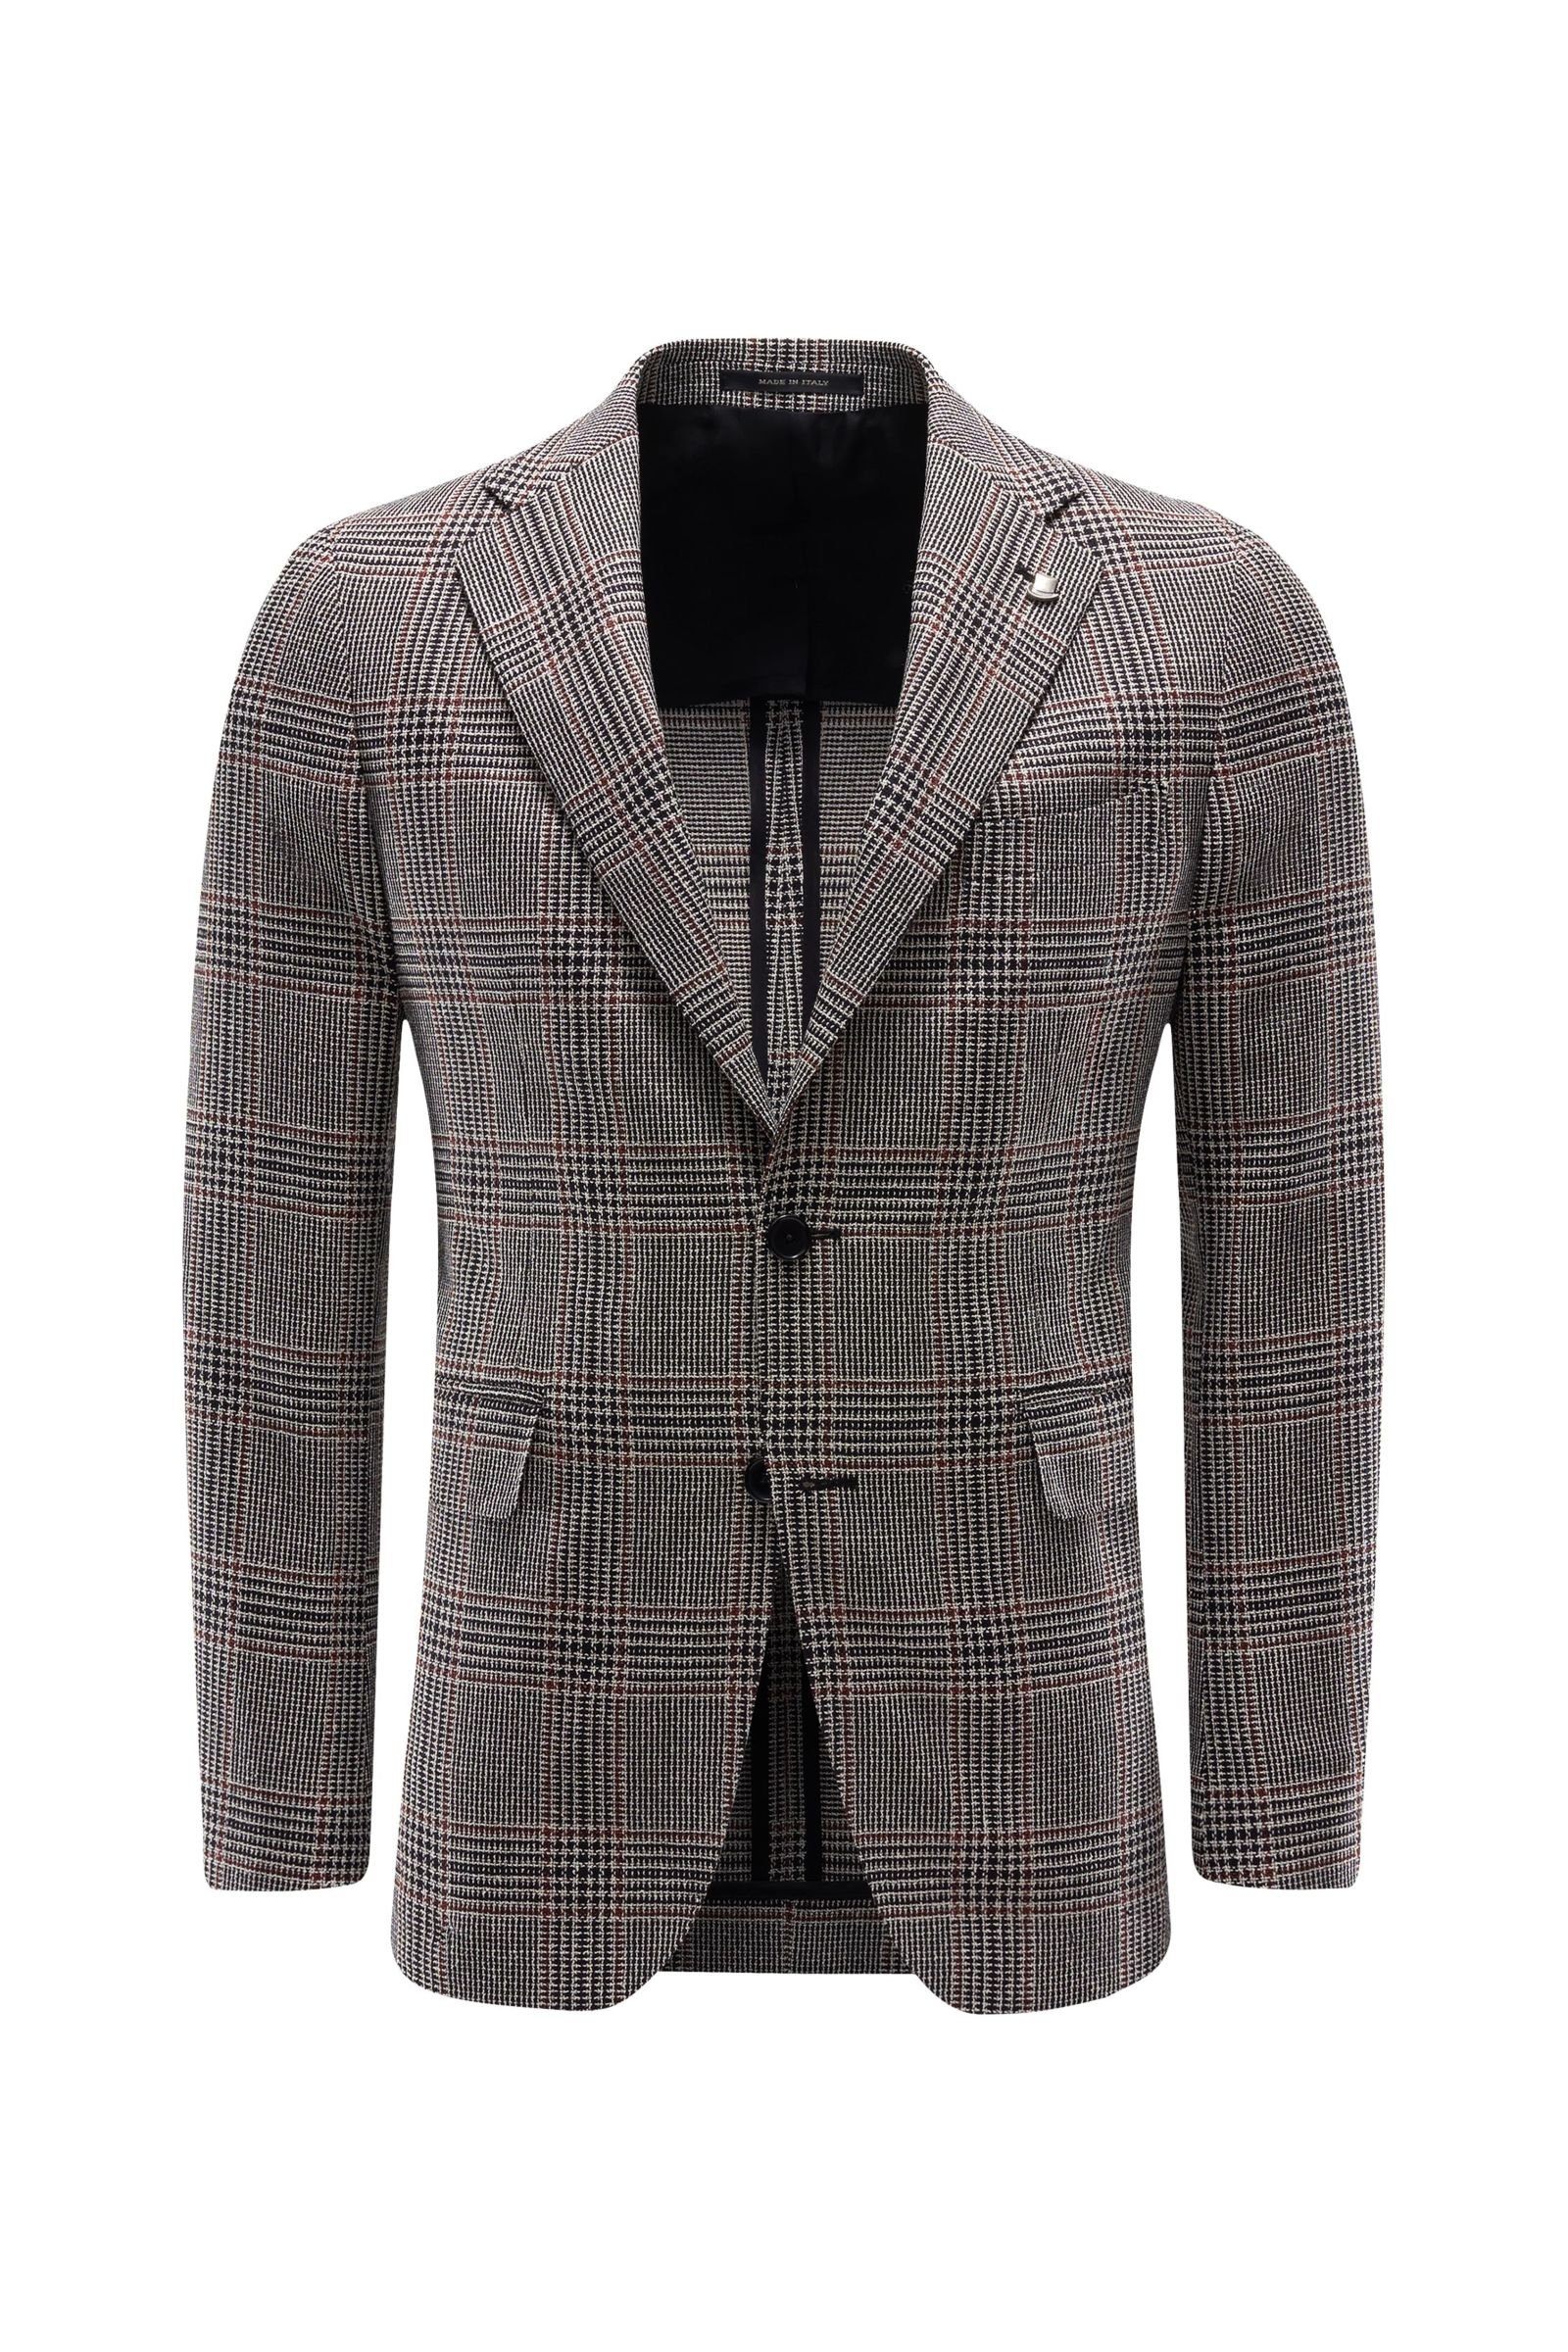 Smart-casual jacket black/brown checked